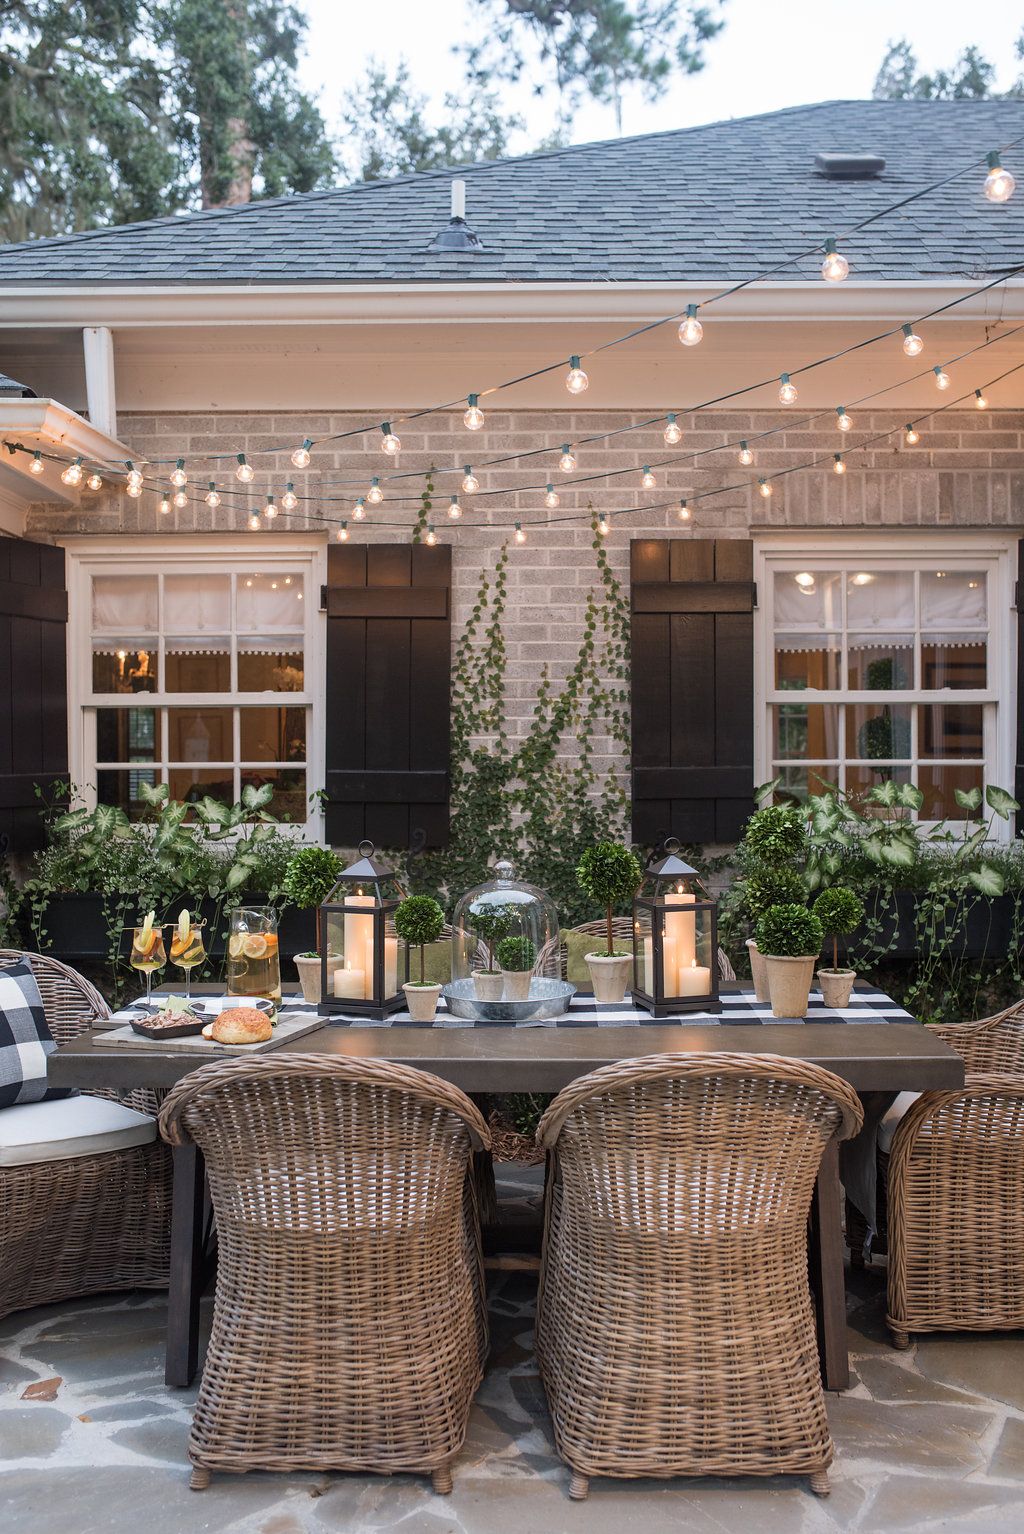 How To Hang Outdoor String Lights, Pergola String Lights Ideas